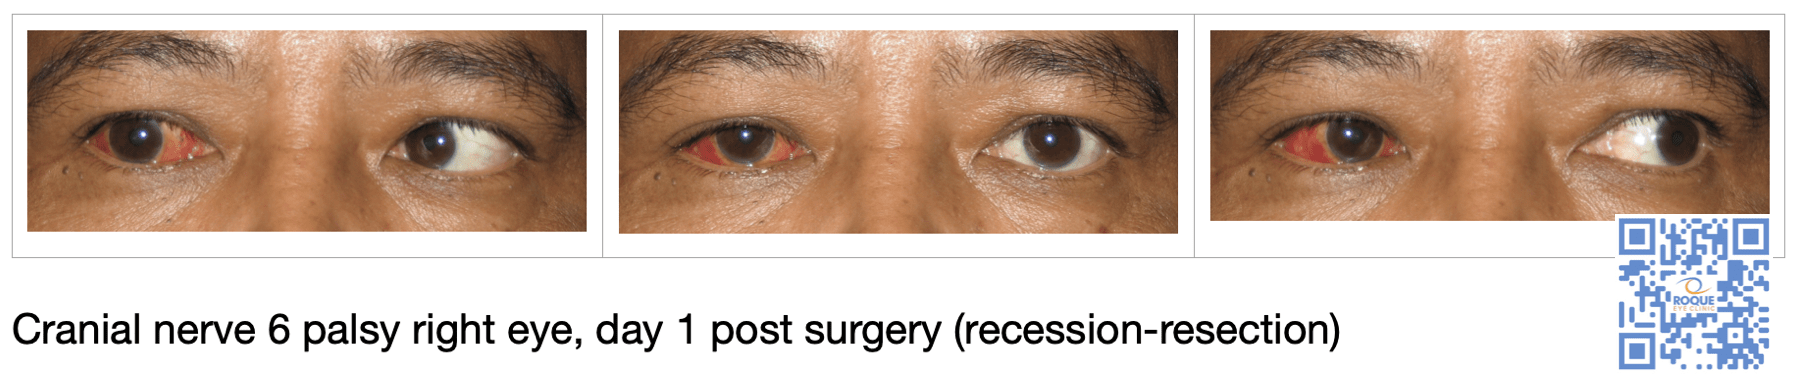 Cranial nerve 6 palsy right eye, day 1 post surgery (recession-resection)